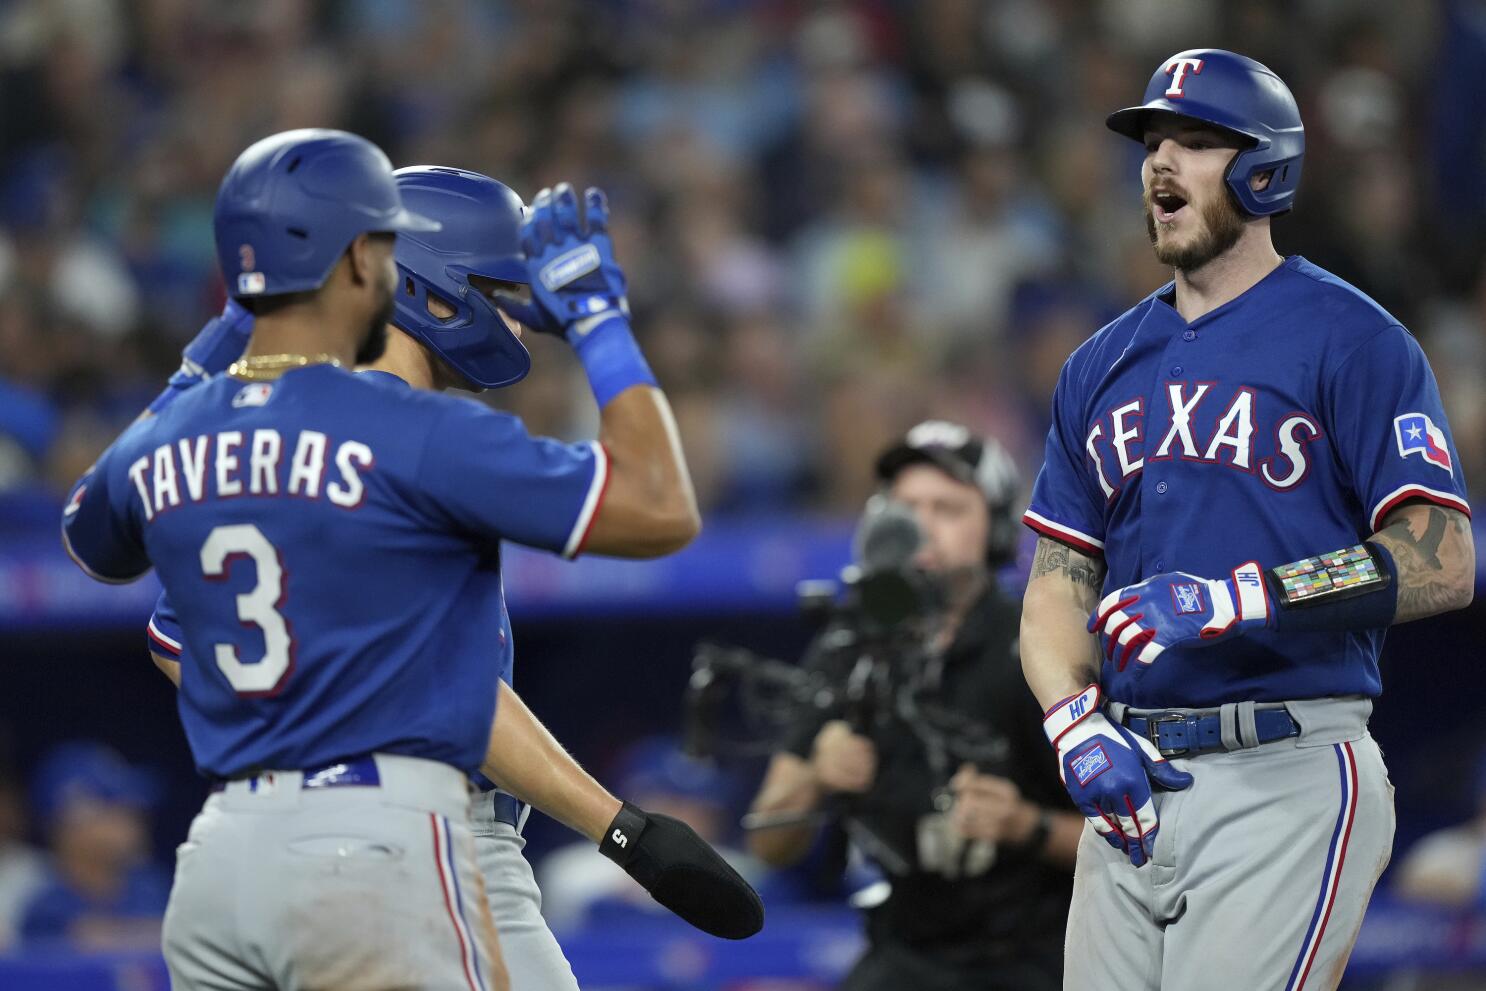 Heim launches grand slam, Carter hits 1st career home run as the Rangers  beat the Blue Jays 10-4 - The San Diego Union-Tribune